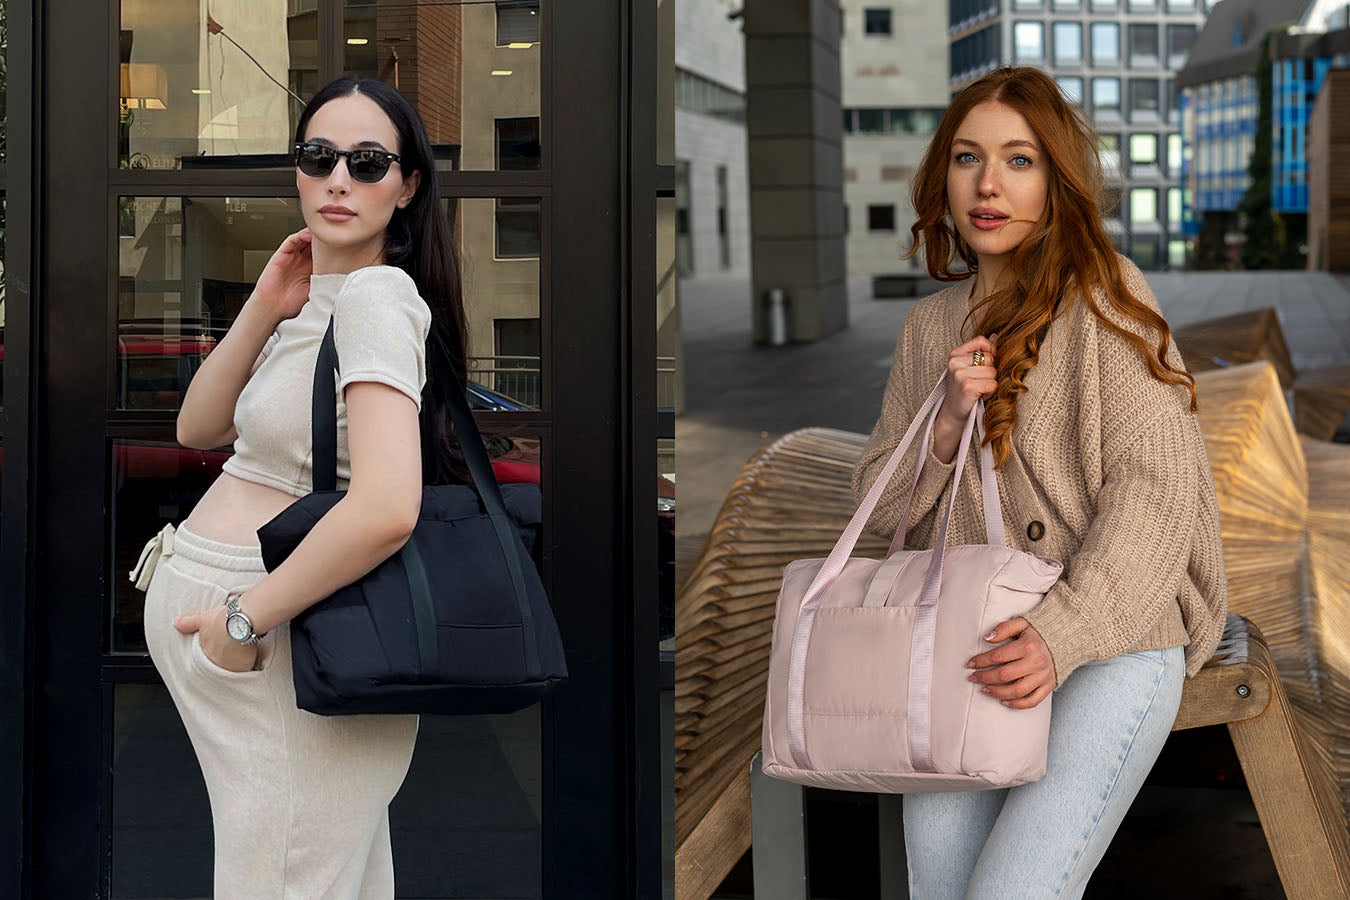 A multipurpose tote bag that can accommodate items for both work and play